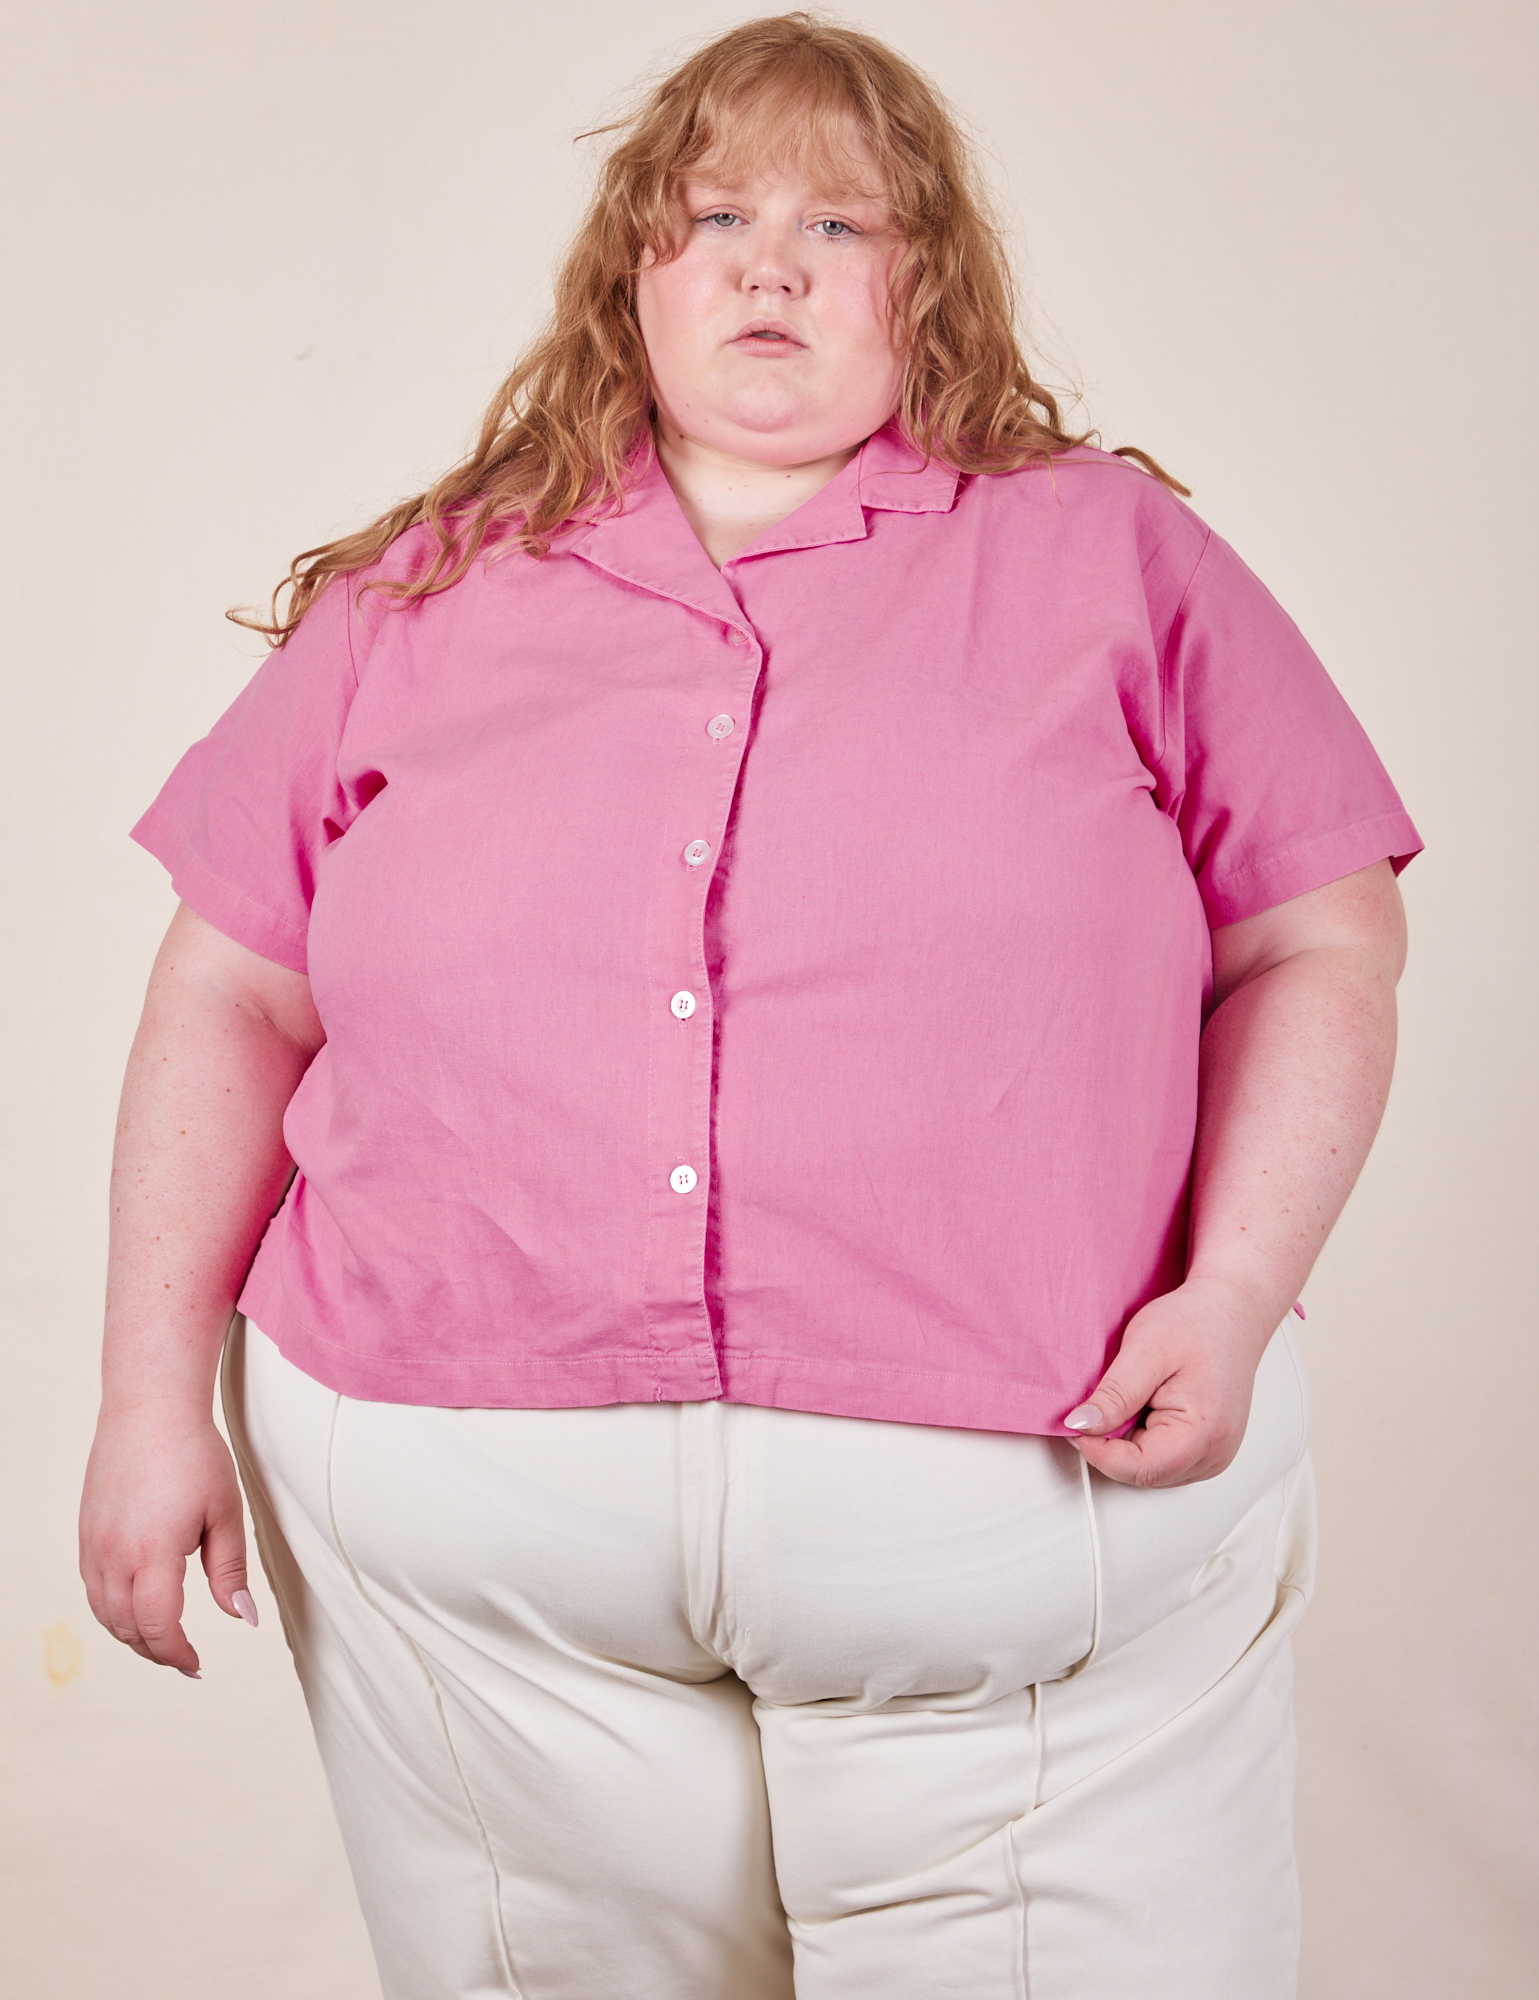 Catie is wearing Pantry Button-Up in Bubblegum Pink